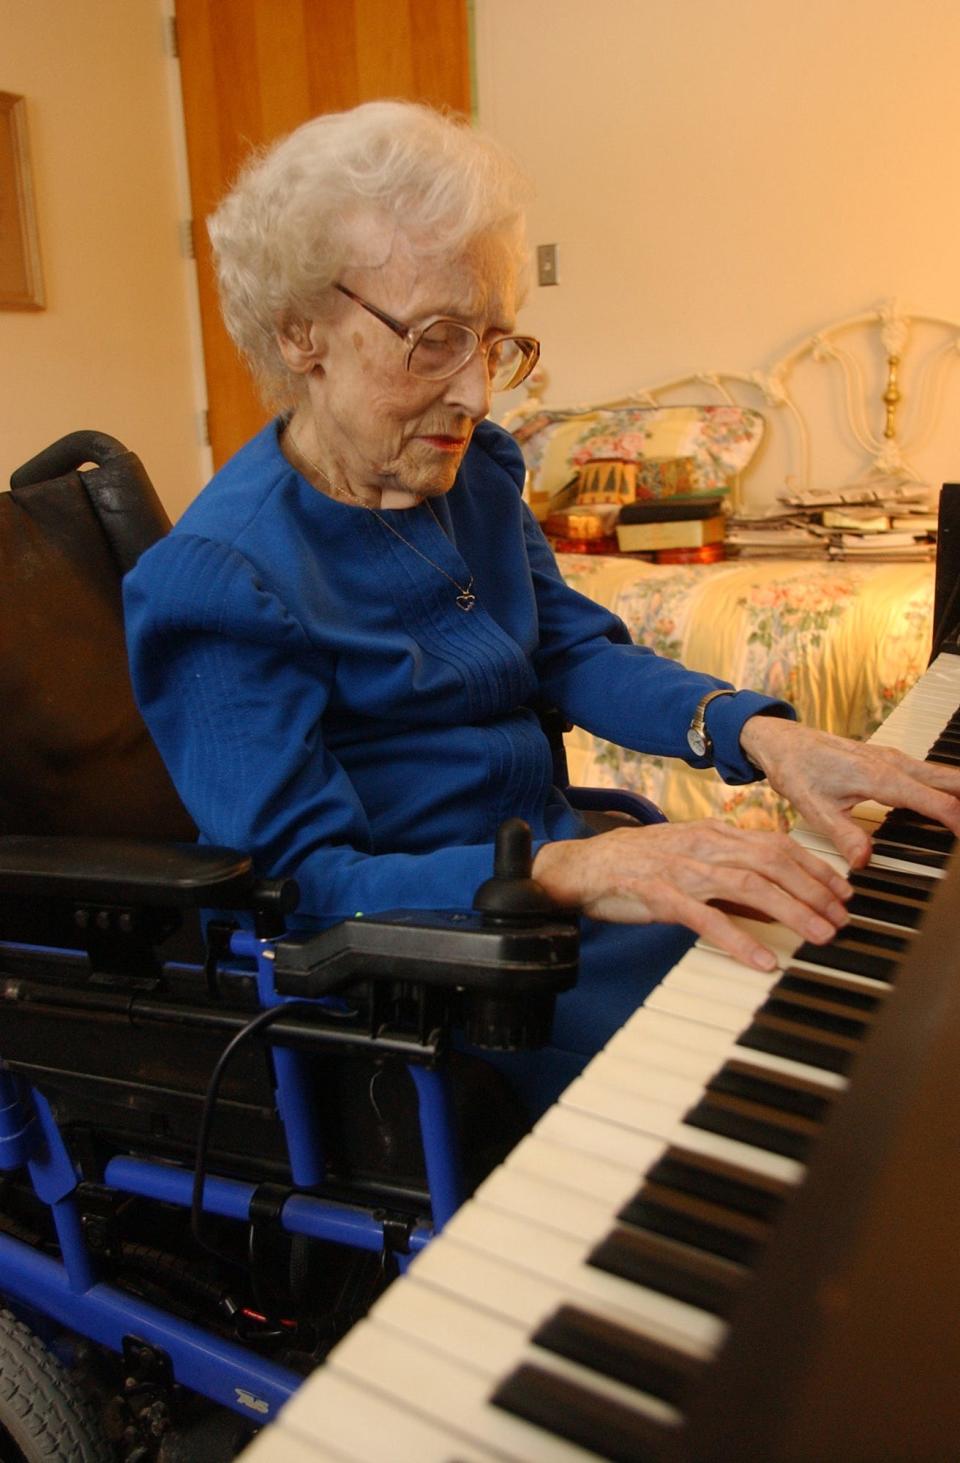 Evelyn Miller, age 94, is photographed in 2004 with the piano in her room at Shannondale, where she usually practiced for four hours a day.